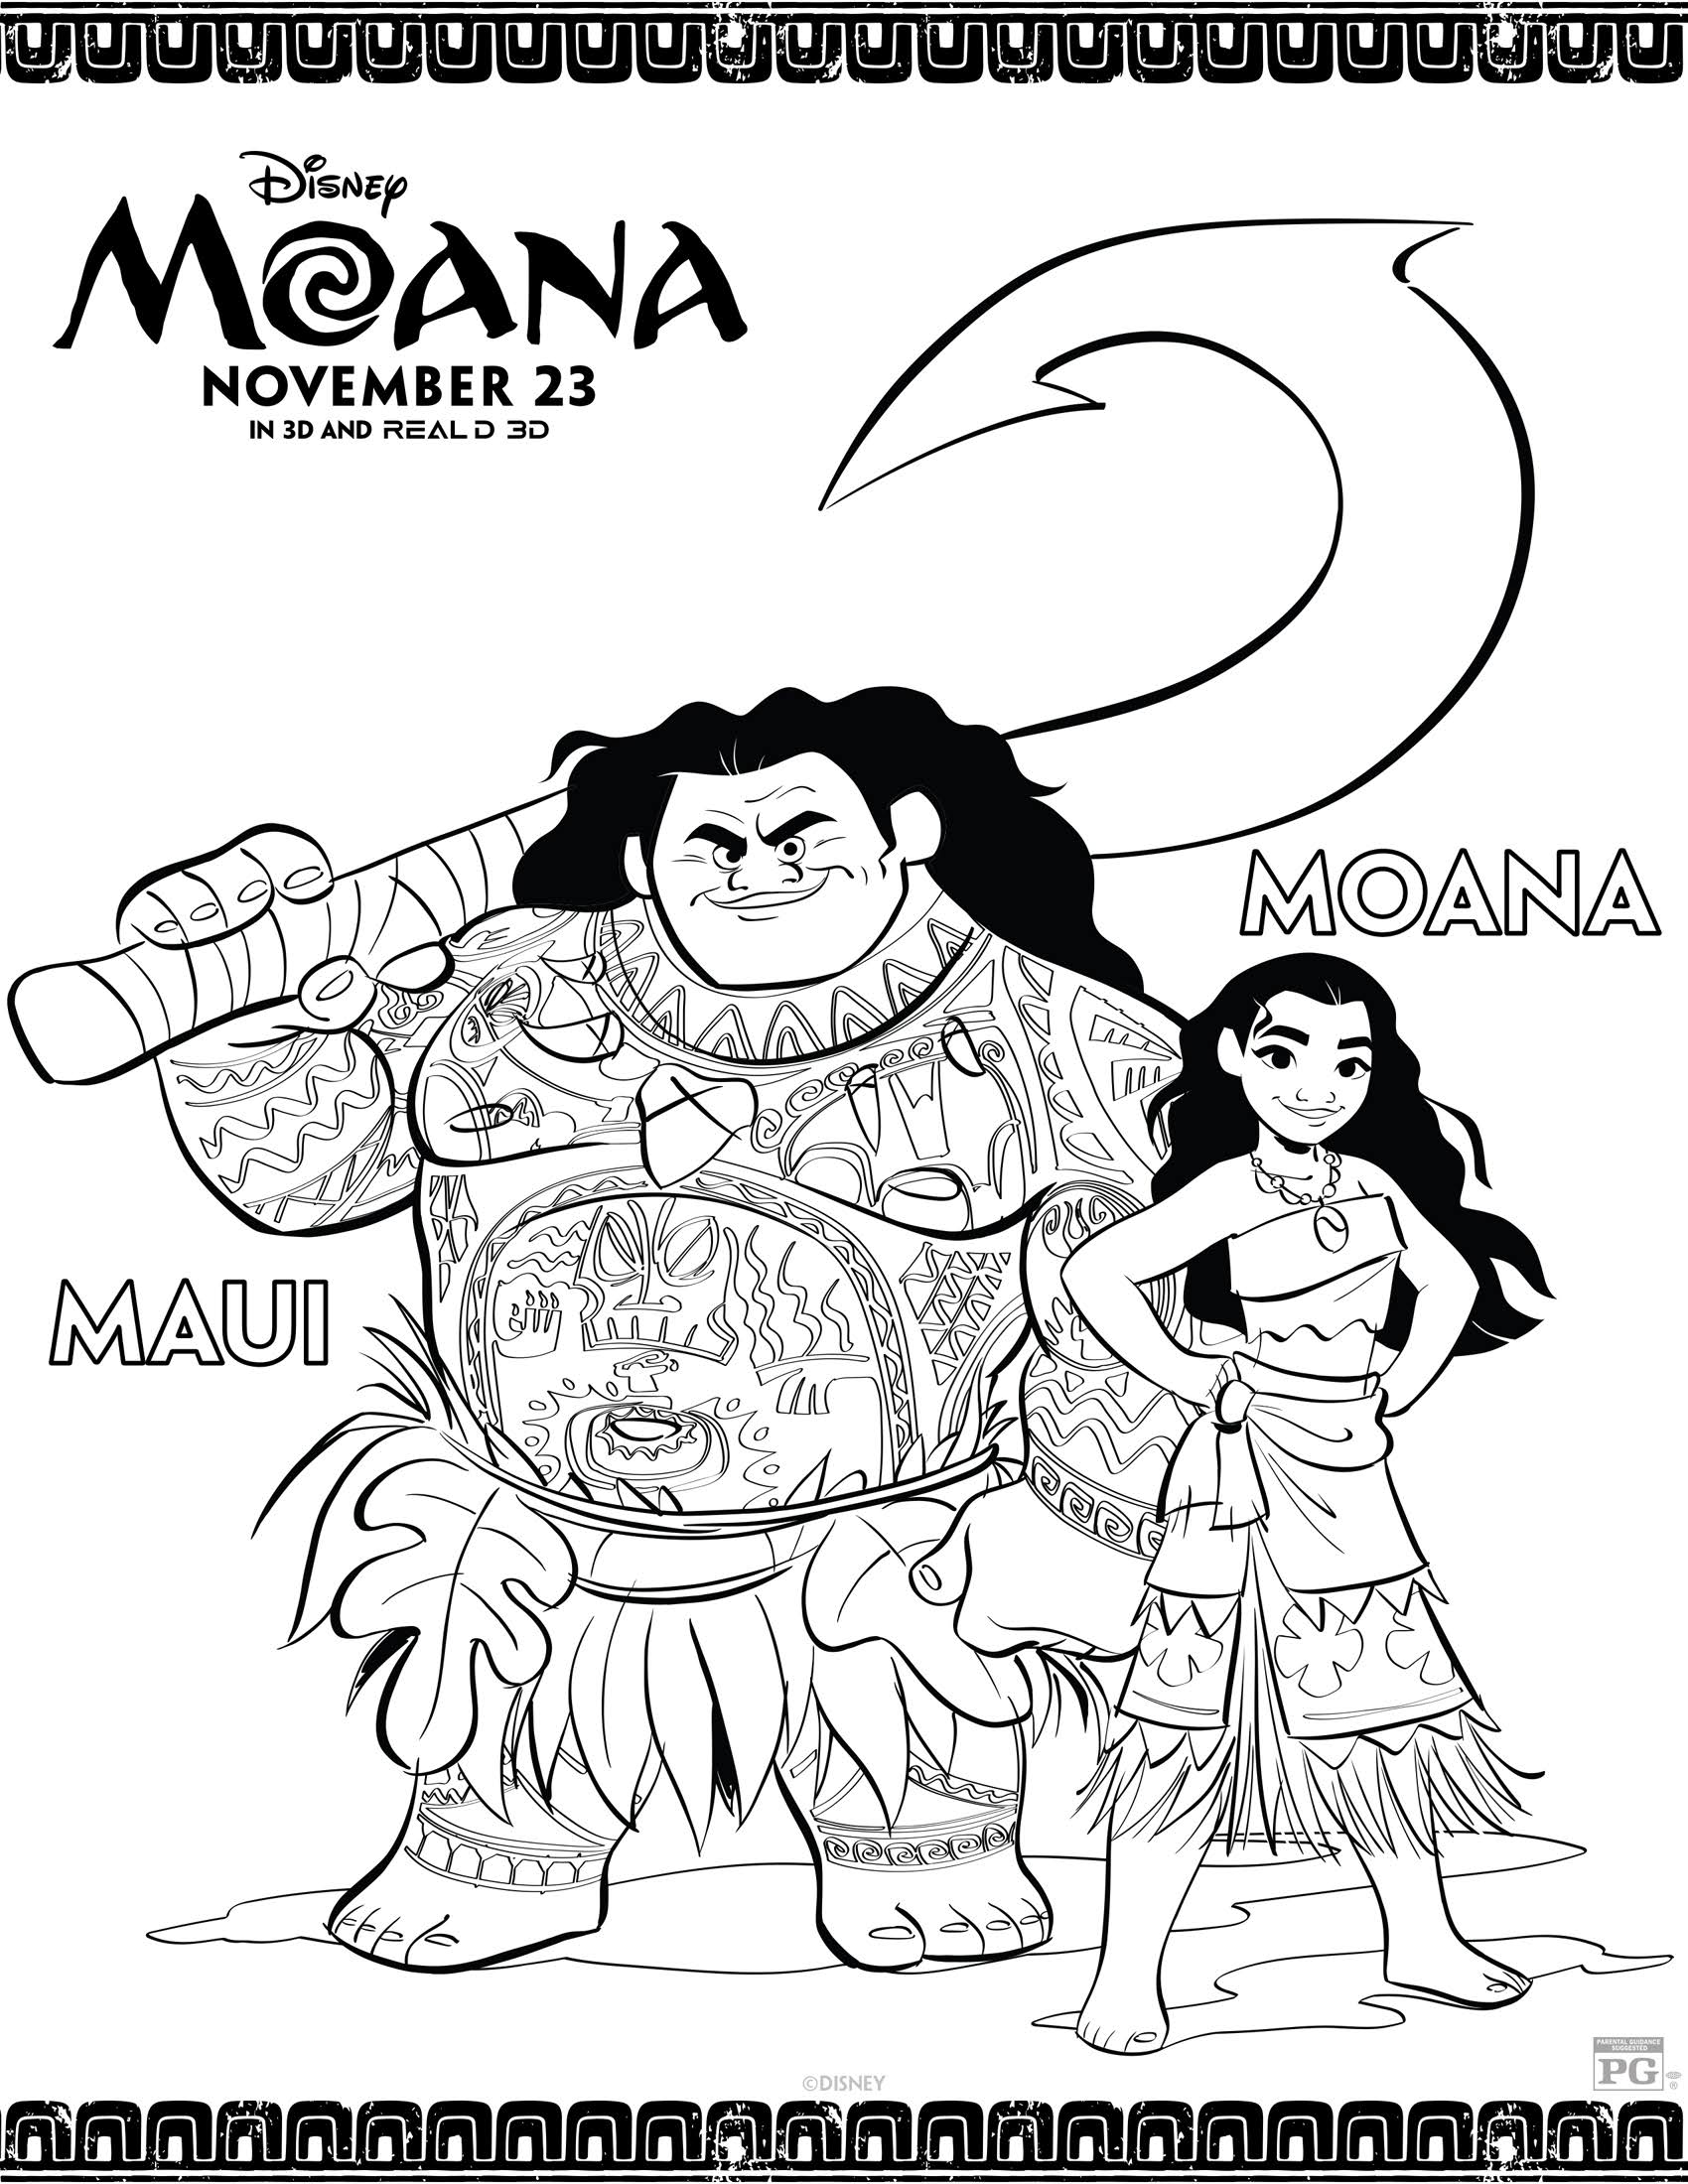 Disney's Moana Coloring Pages and Activity Sheets Printables!